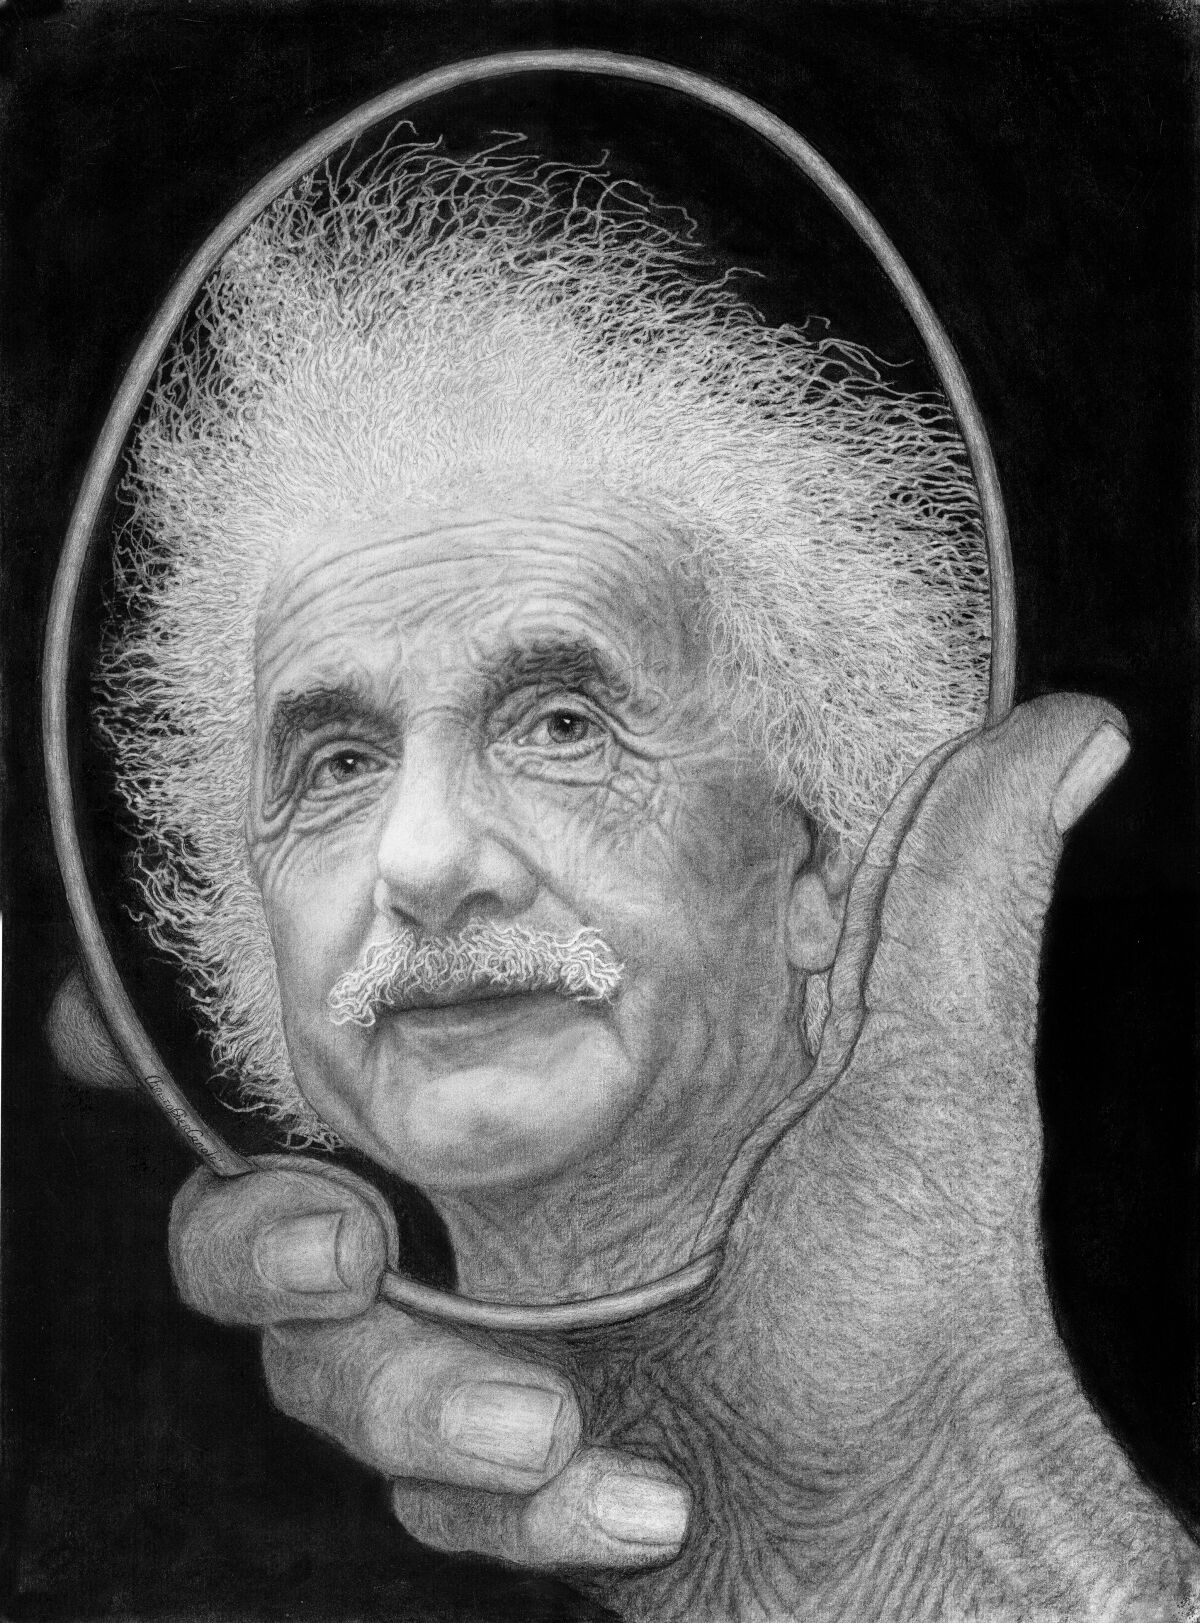 This Albert Einstein drawing by Christopher Canole is 24 by 36 inches; all others he donated to UC San Diego are 18 by 24.